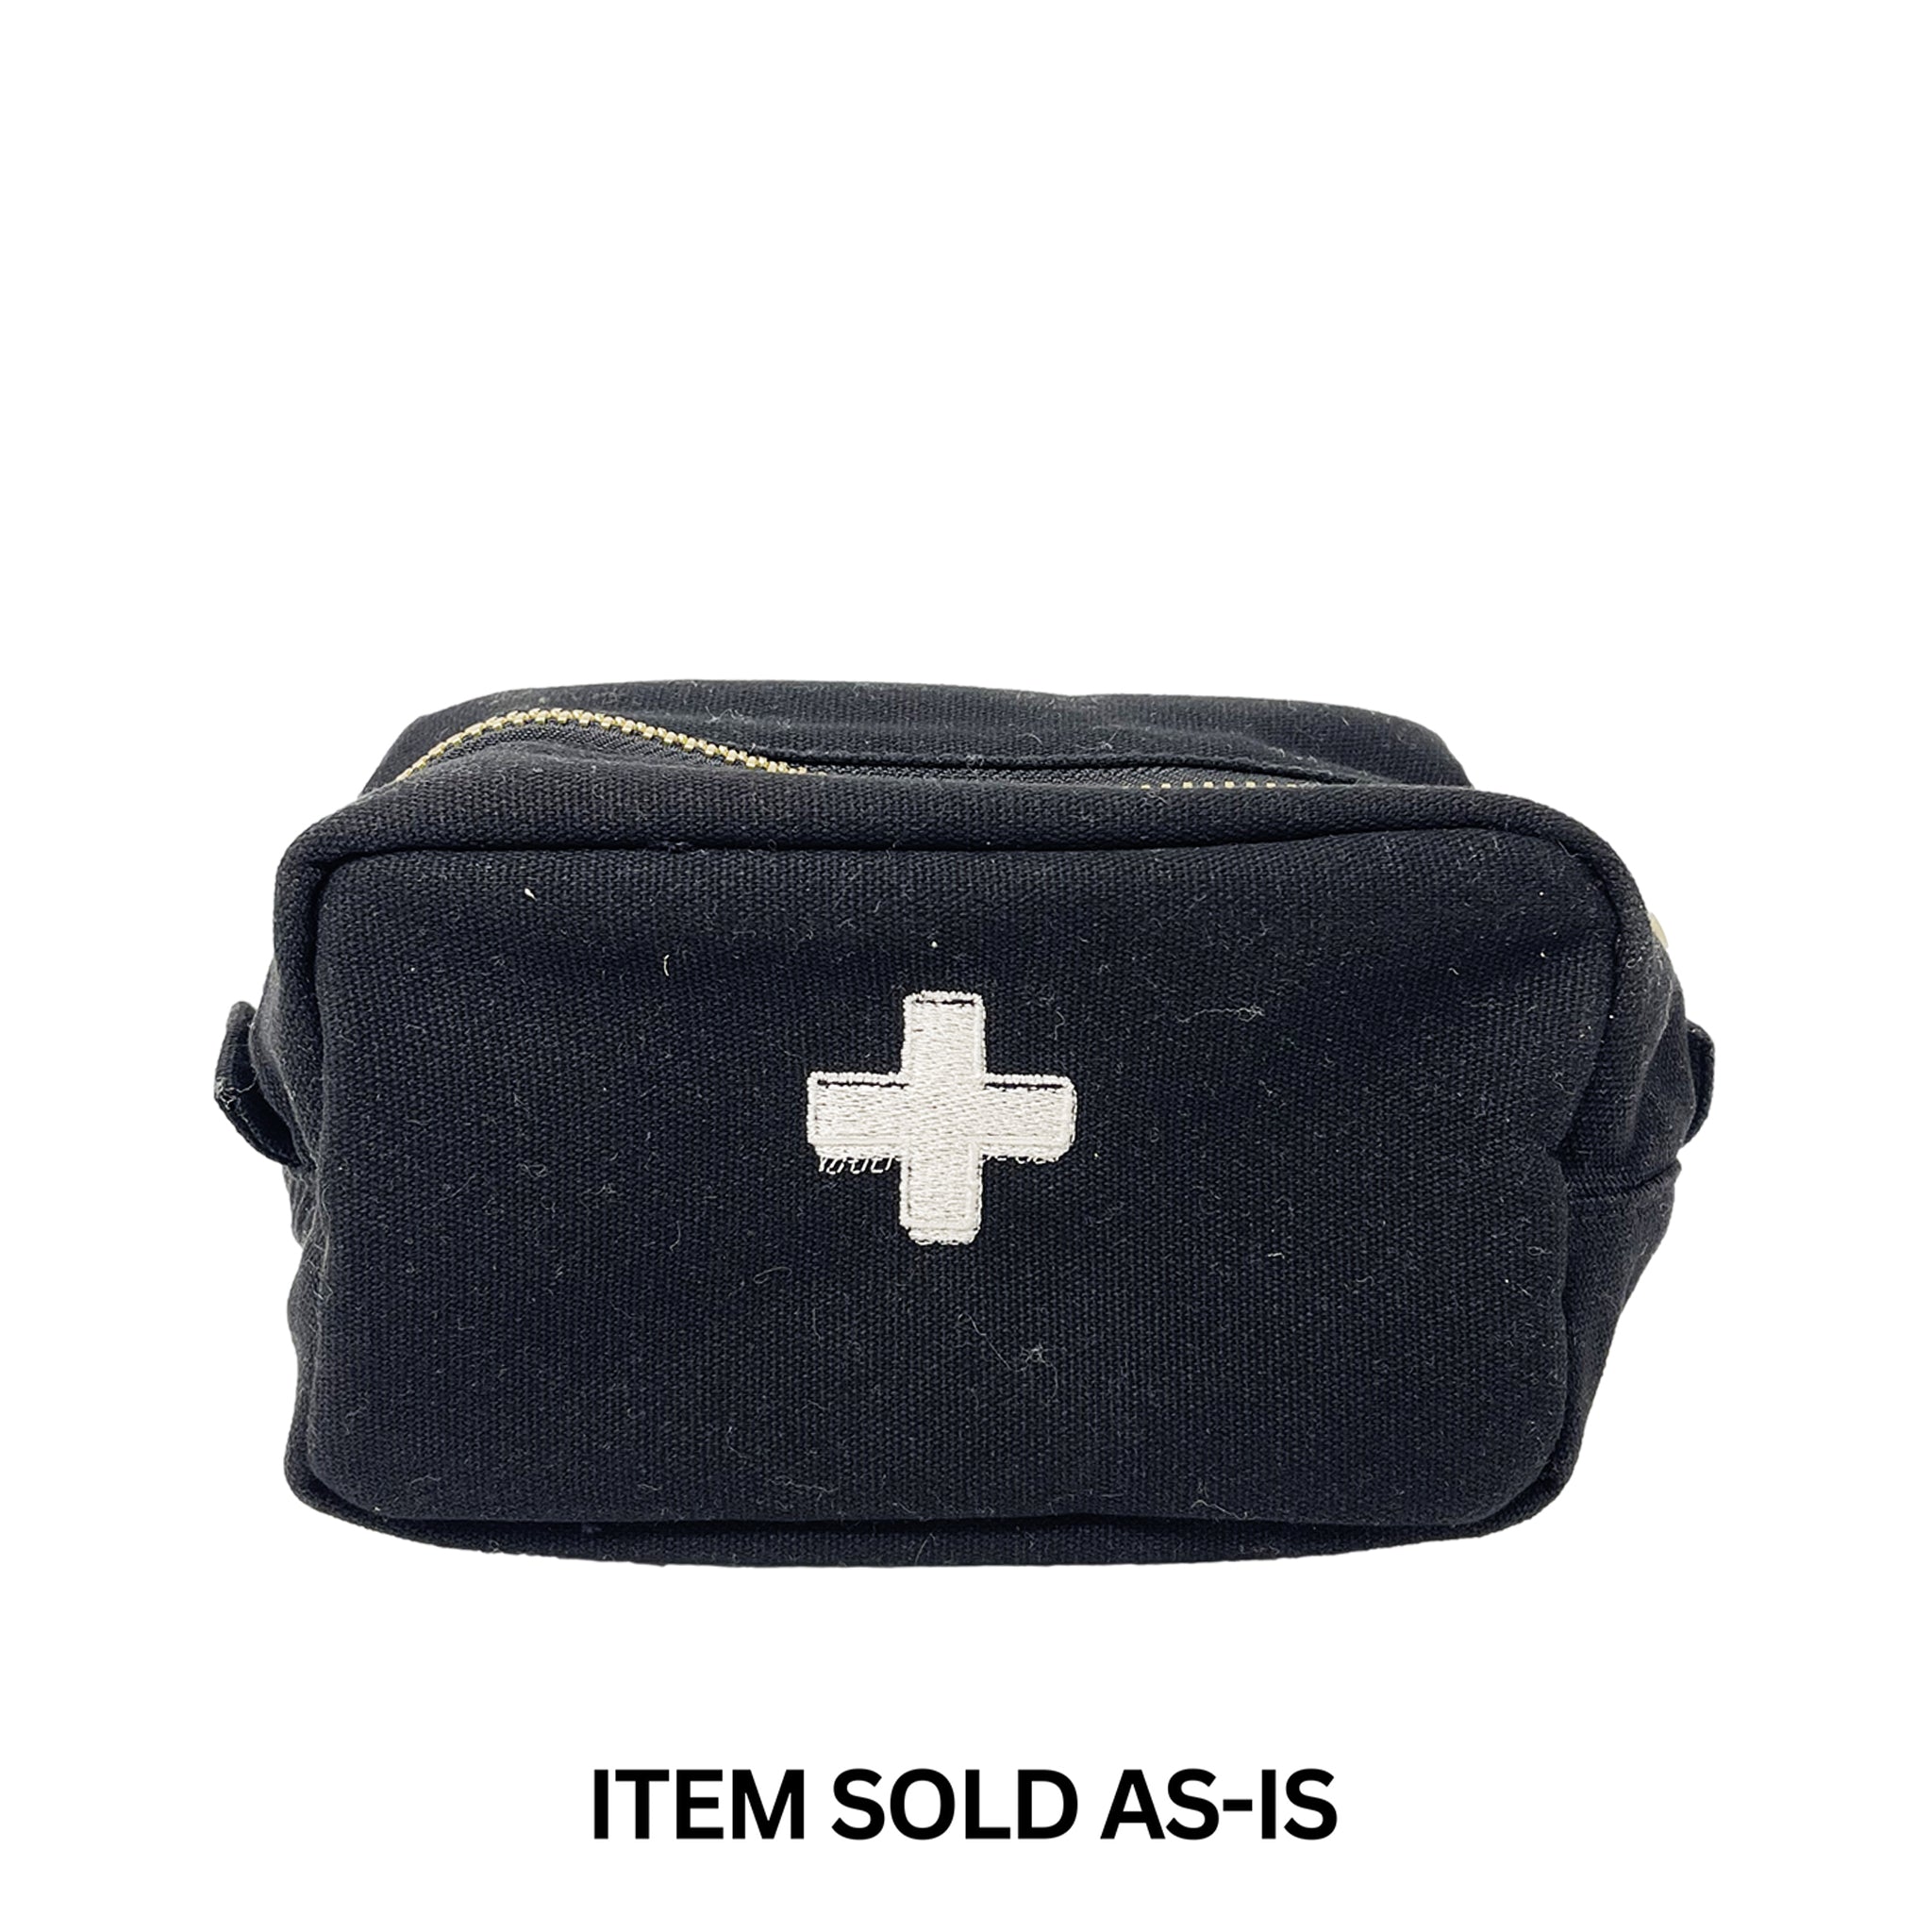 SALES BIN - Small Toiletry Pouch, Black - Bag-all